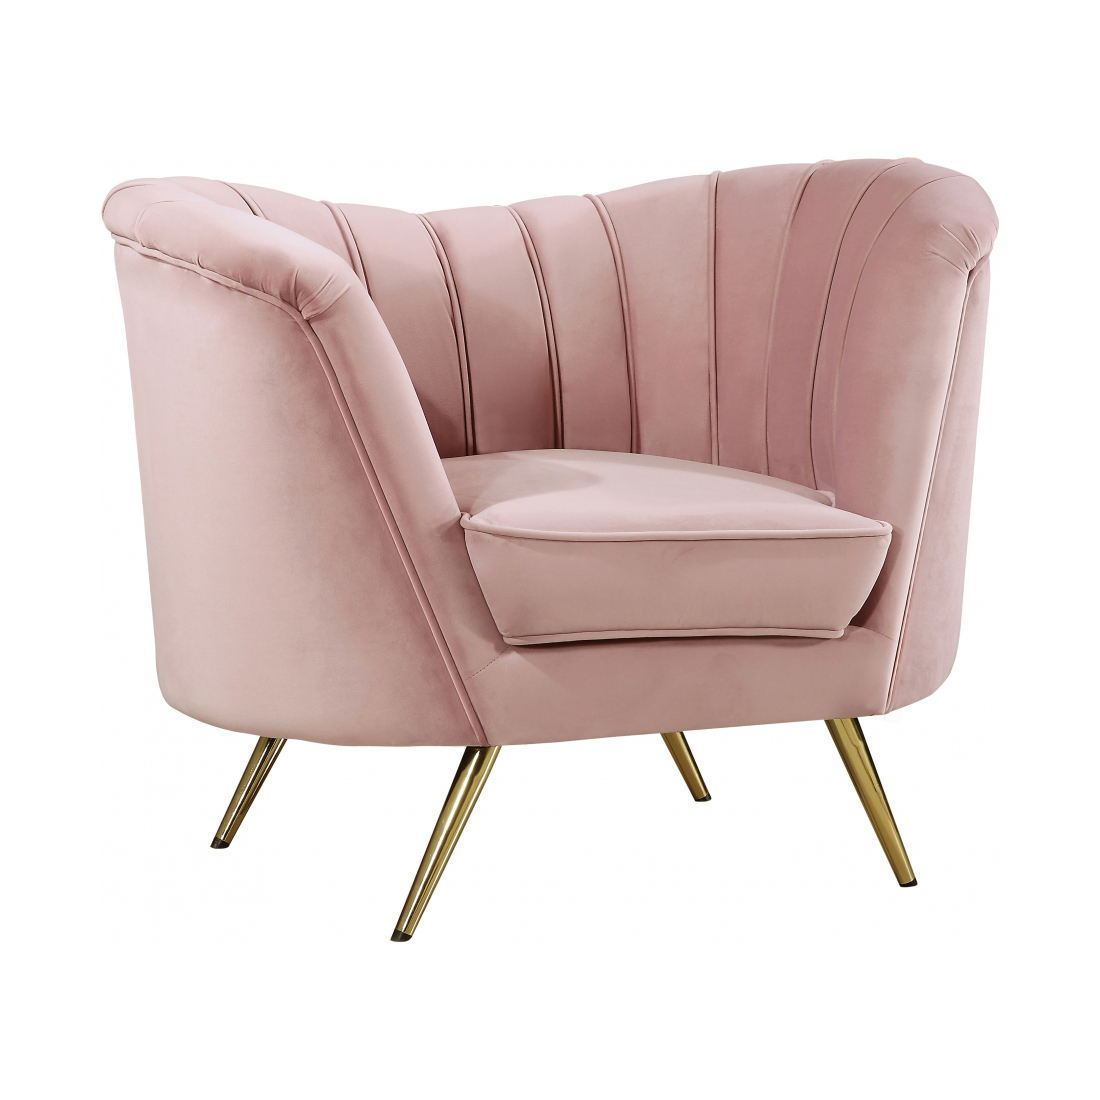 Miro Lounge Chair (Pink) FormDecor Event Trade Show